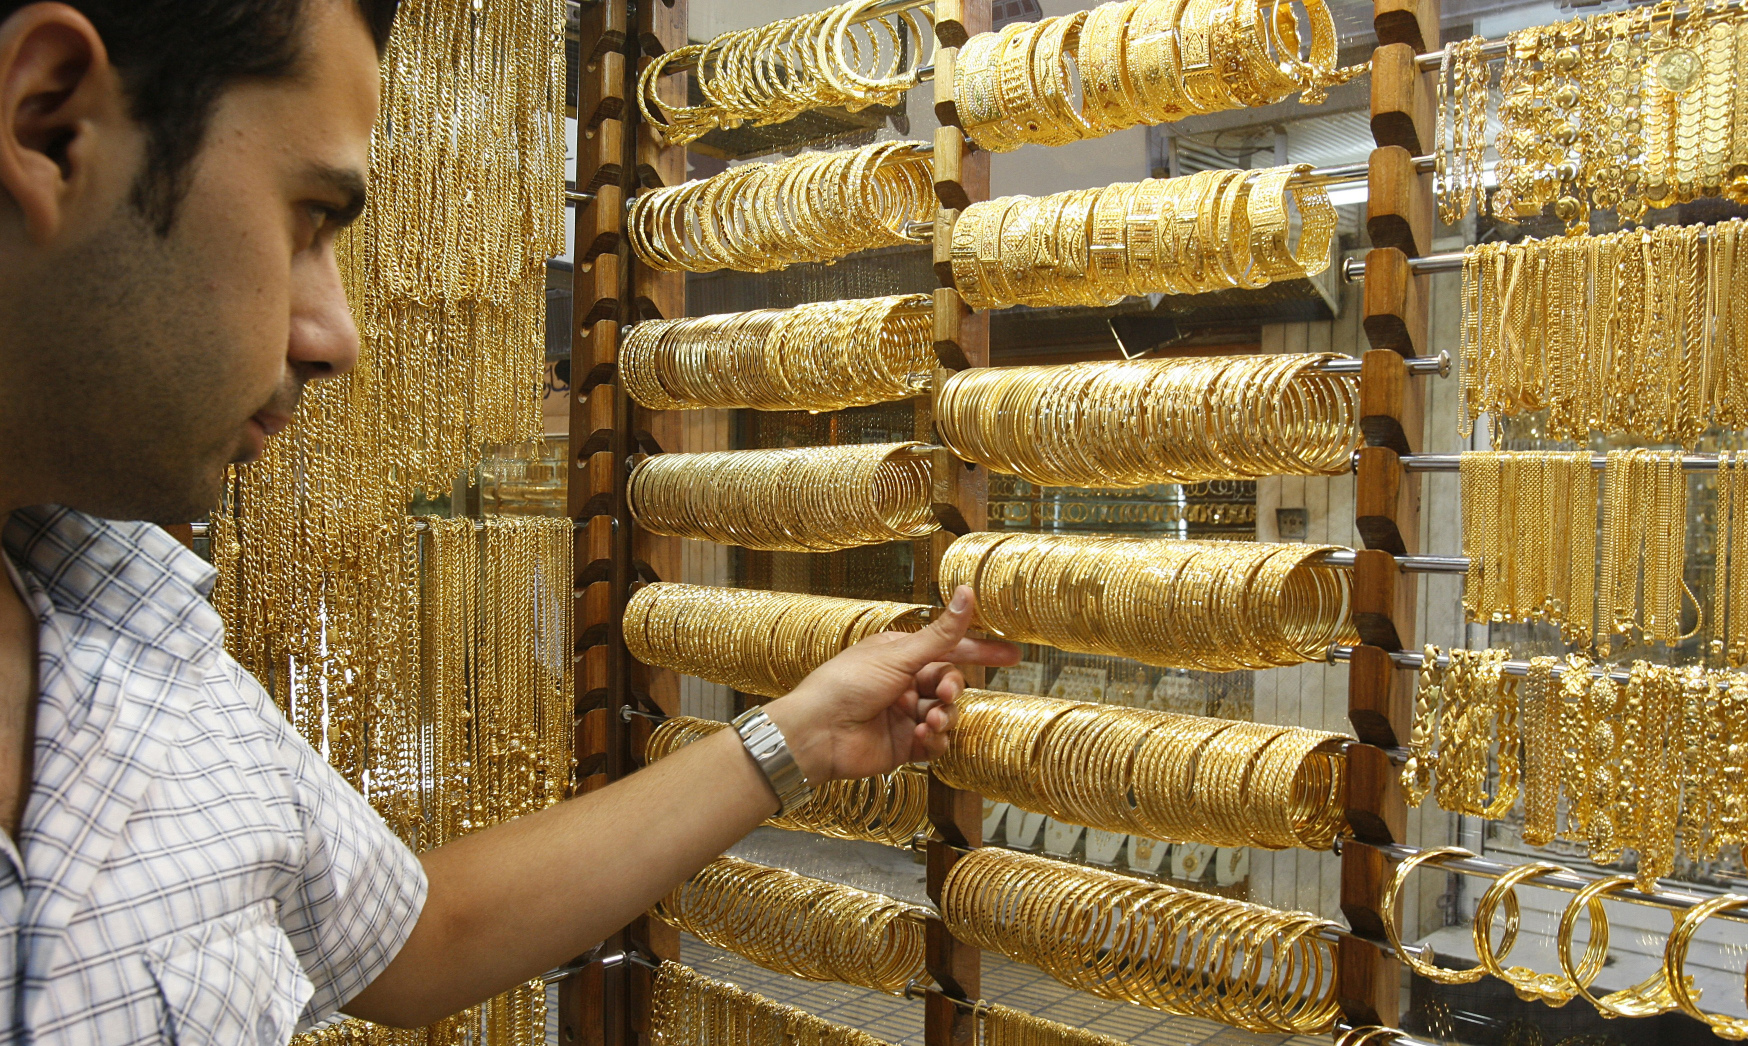 Gold shop owner organizing displayed gold cuffs